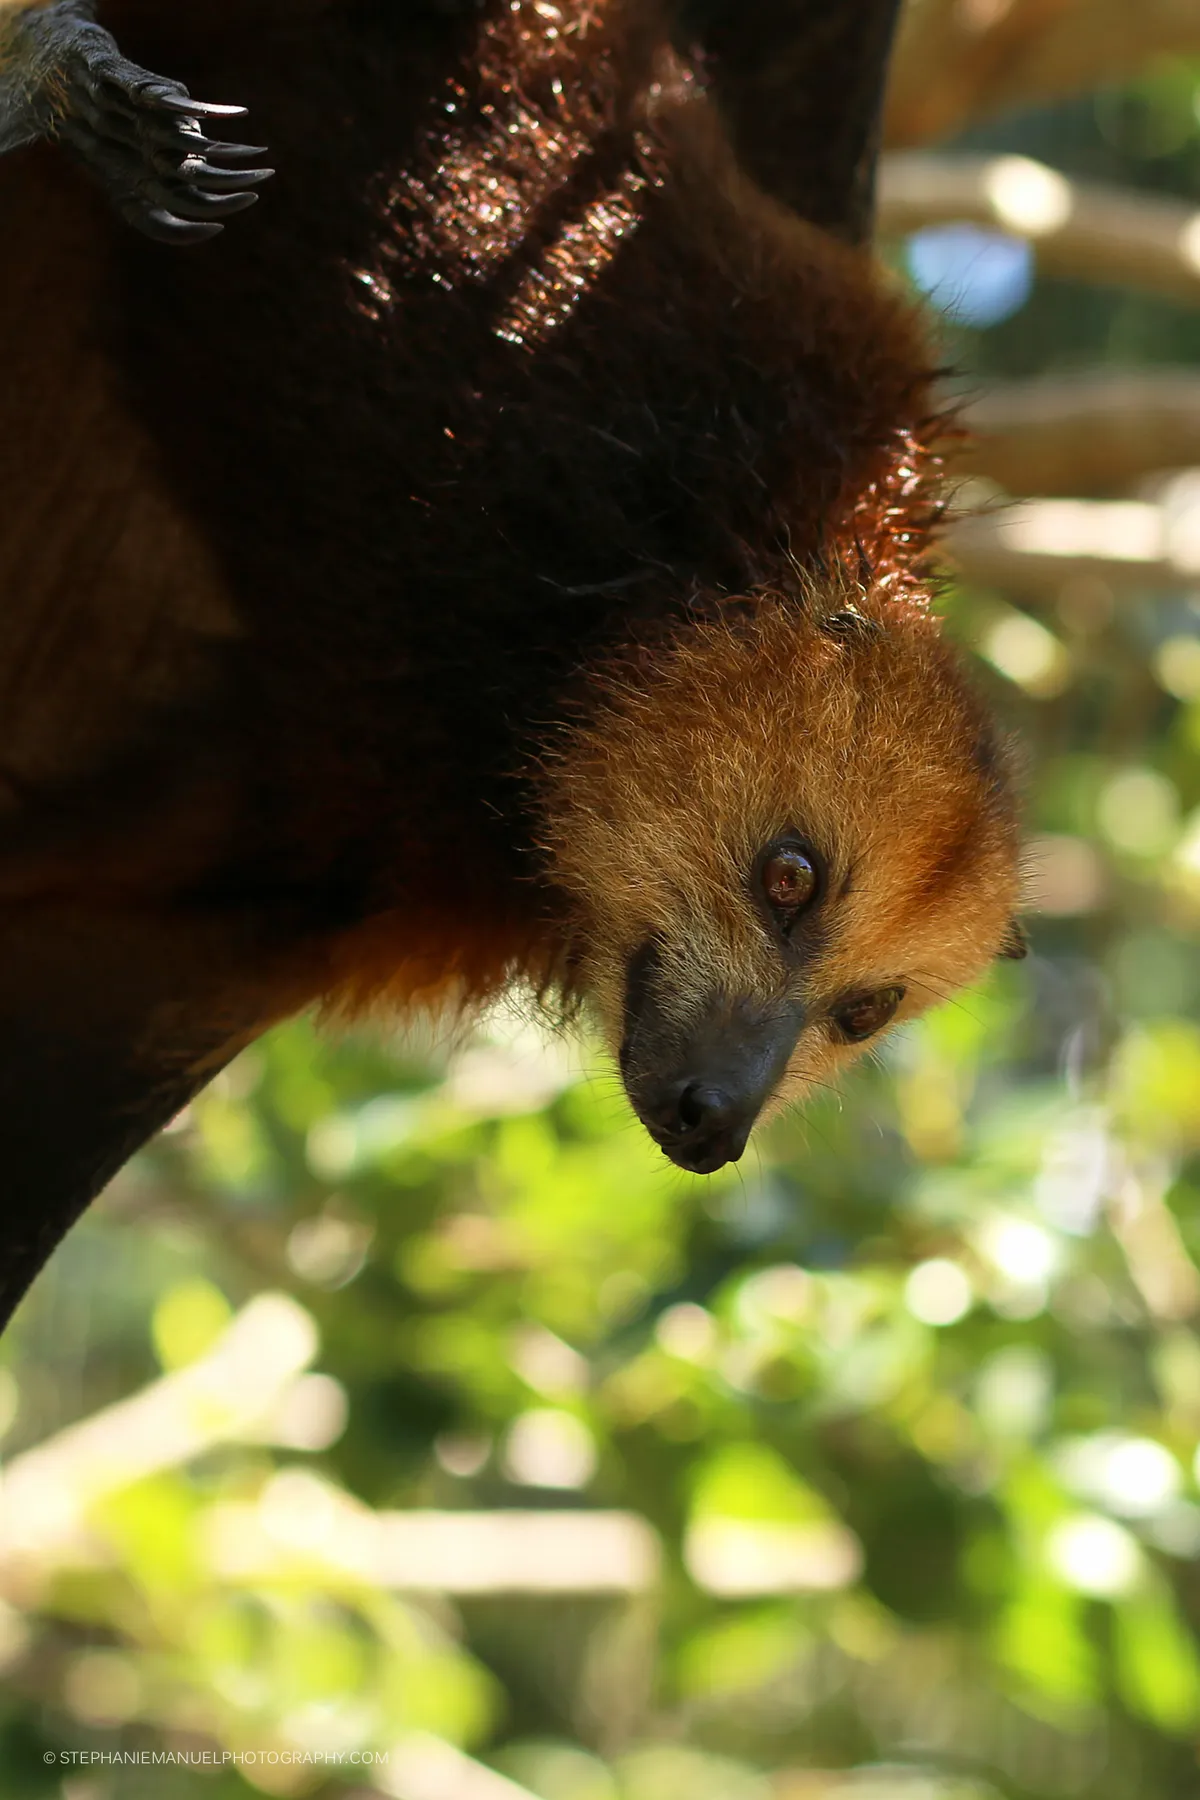 The Mauritius fruit bat Pteropus niger following the culling in 2015 is now an endangered species; lle aux Aigrettes,Mauritius.